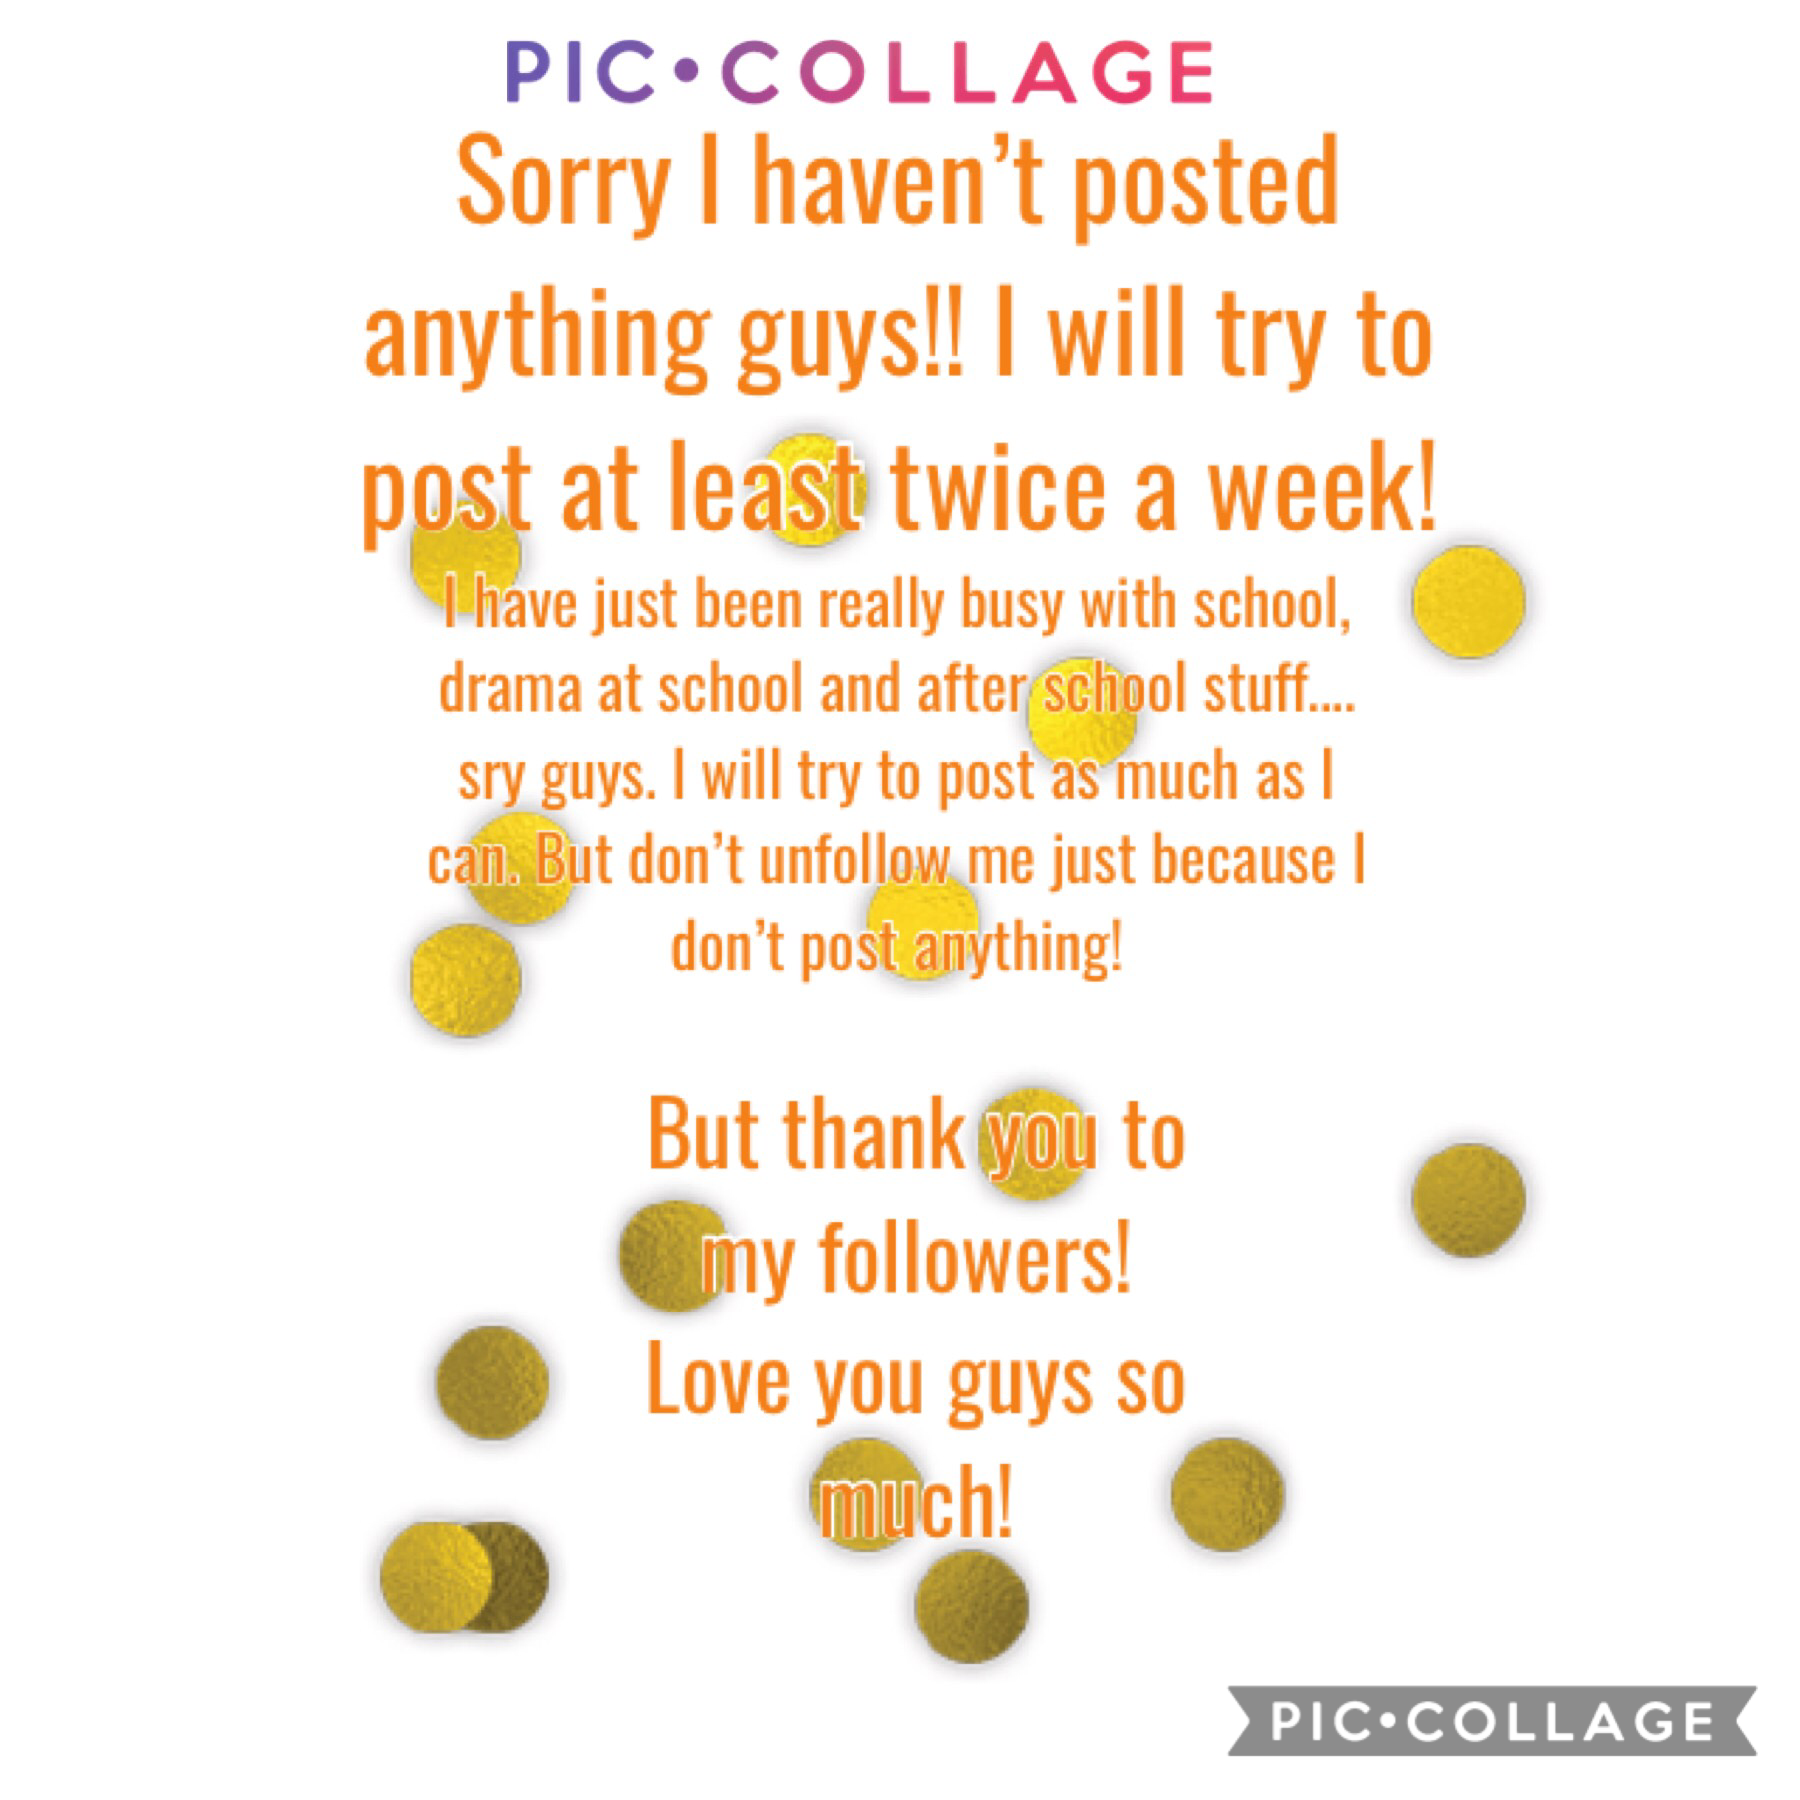 Sorry guys! I will try my best! But I am not leaving. I love to see all your collages!😍😊